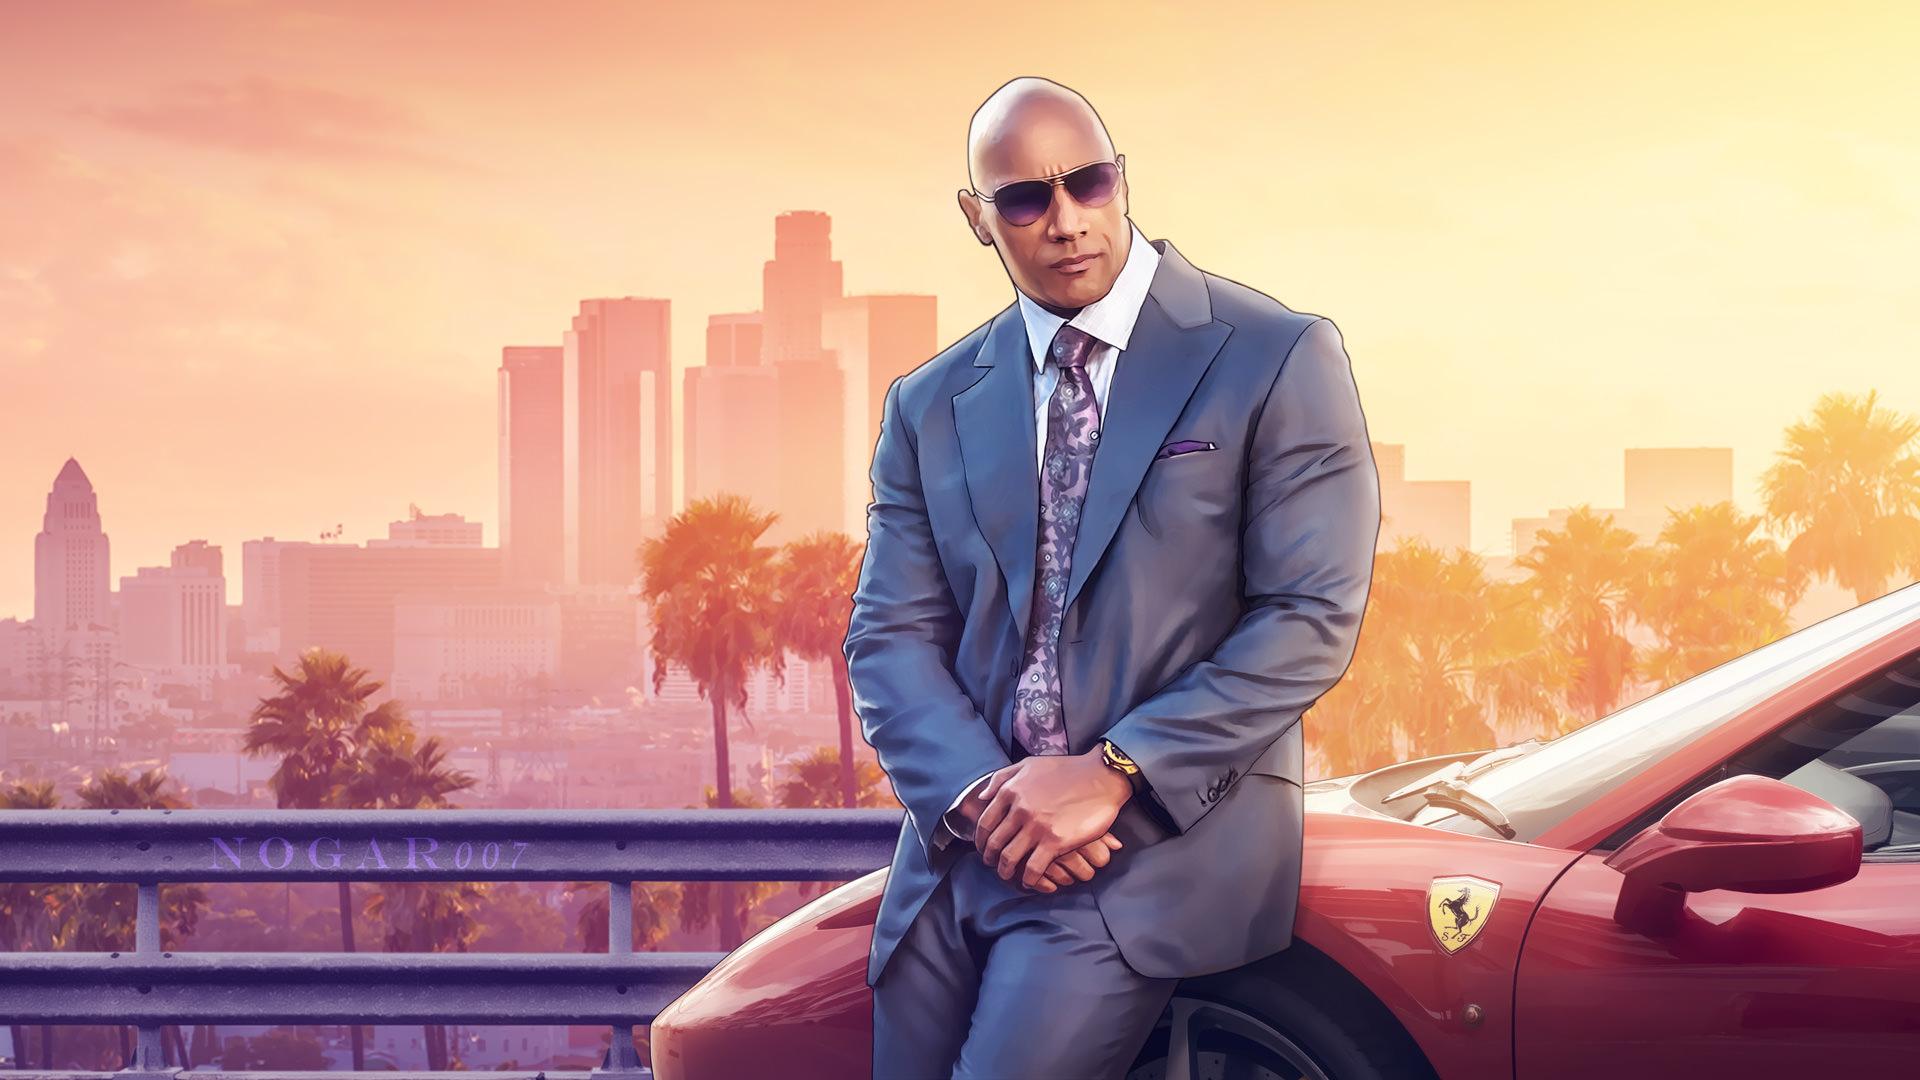 I made this wallpaper of the Rock as a GTAV character